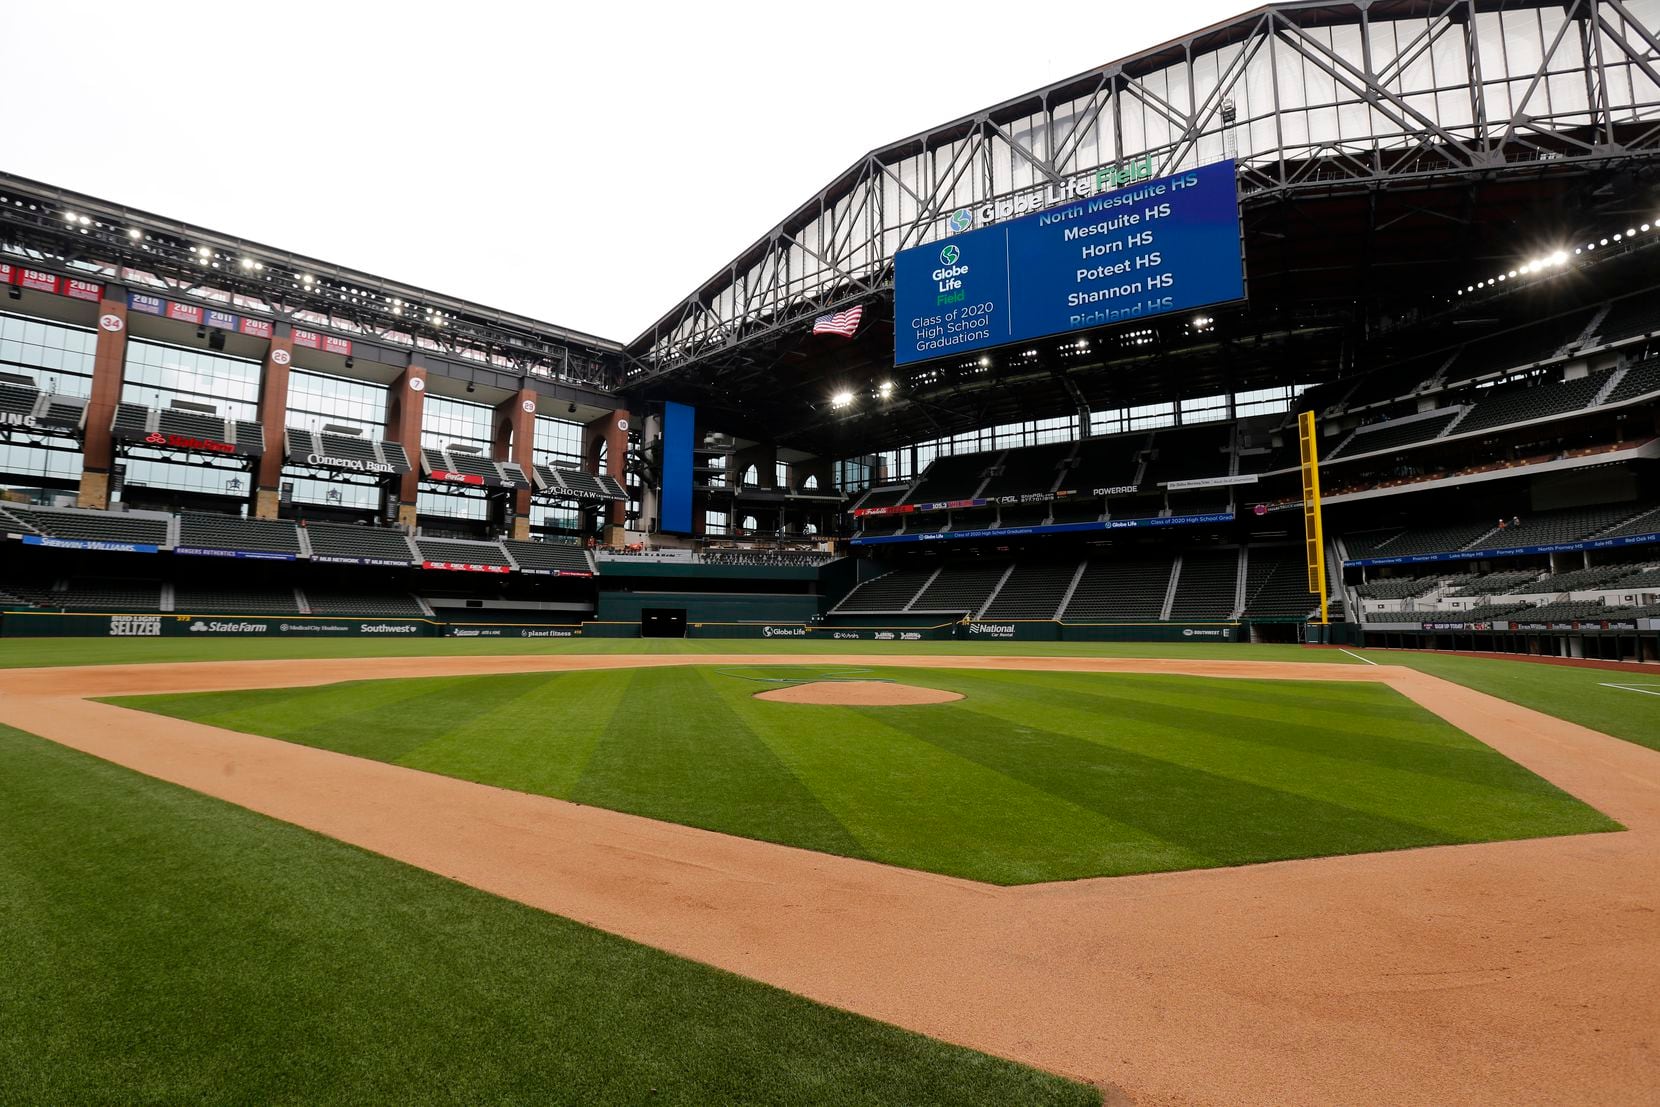 Fans to get first look at new Texas Rangers ballpark with guided